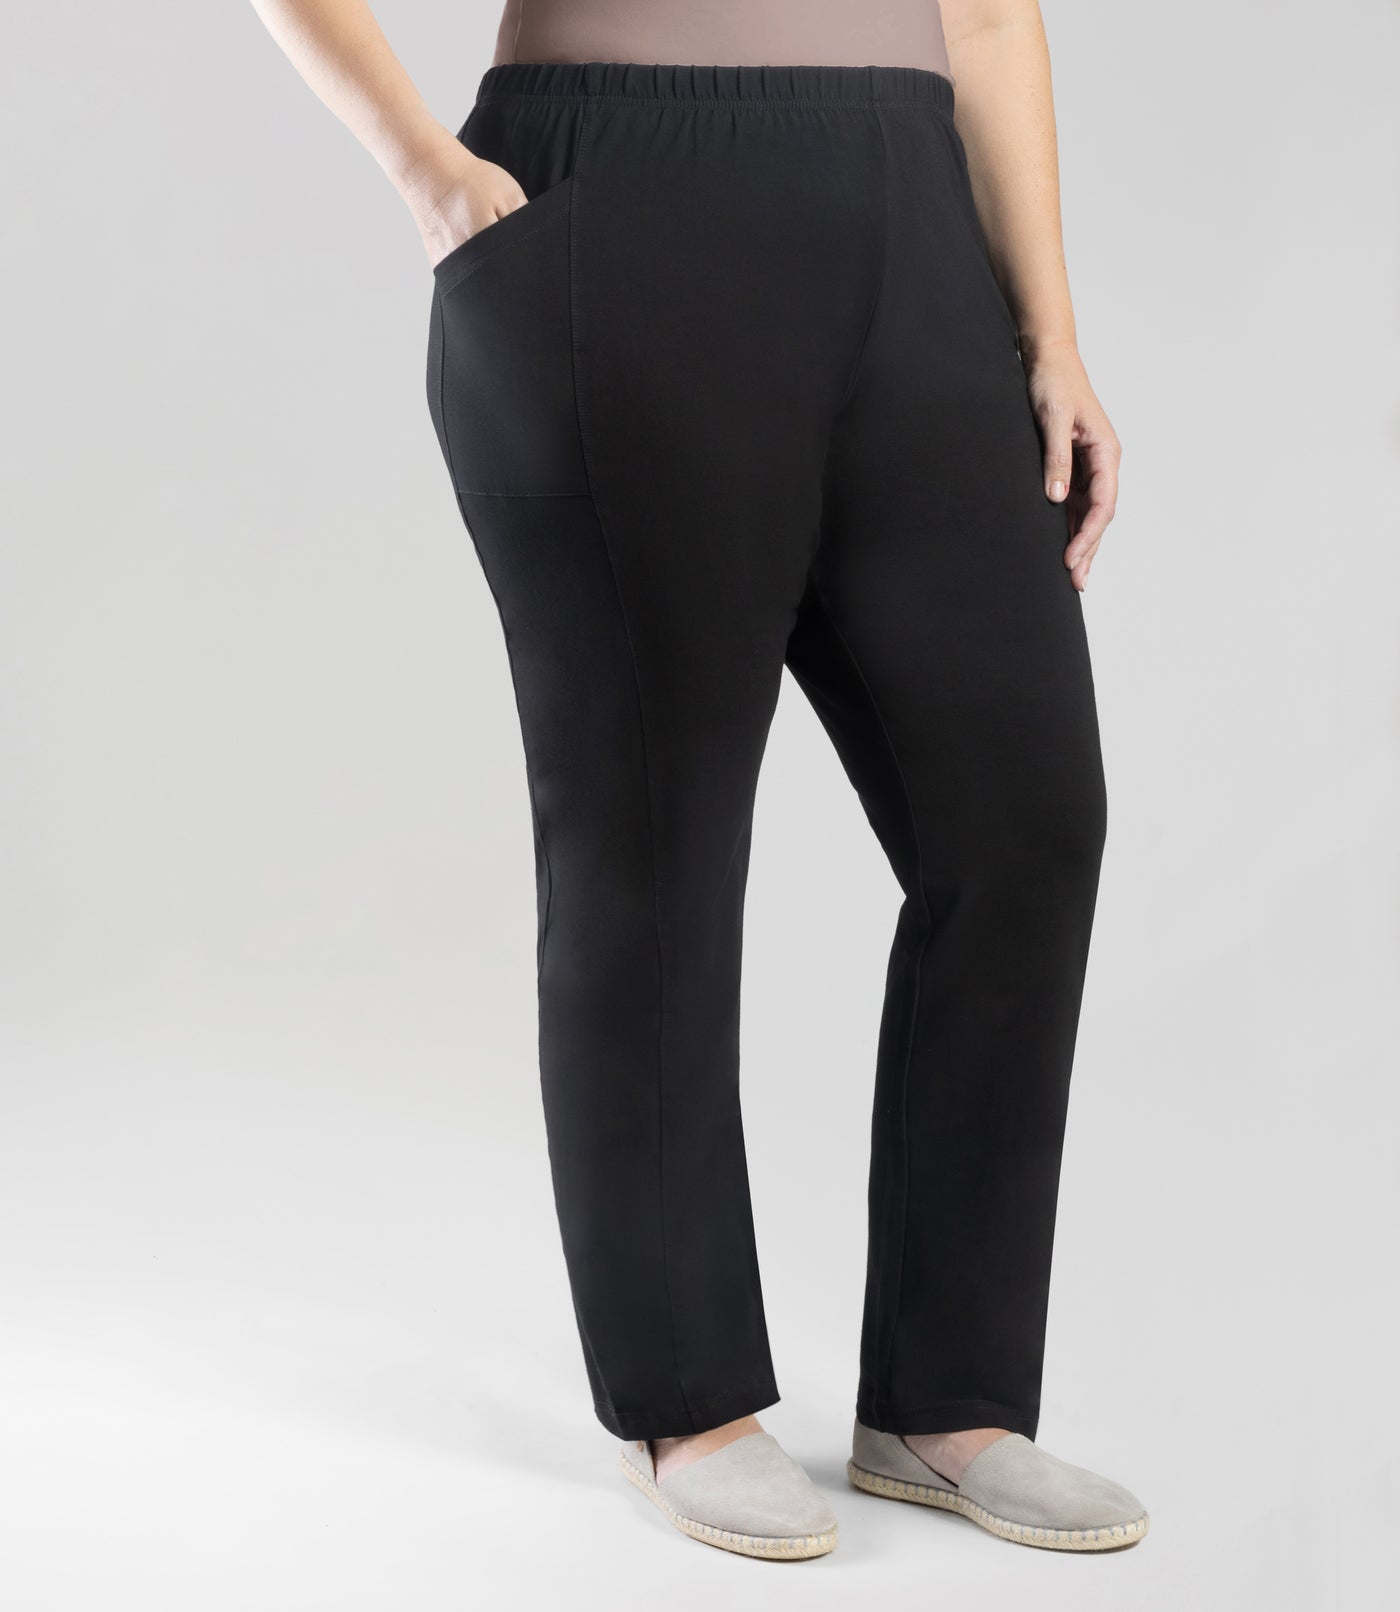 Naked Feel Loose Fit Sport Yoga Pants Workout Joggers Women Elastic Workout  Gym Leggings With Two Side Pocket 321 From Yuanmu23, $29.55 | DHgate.Com